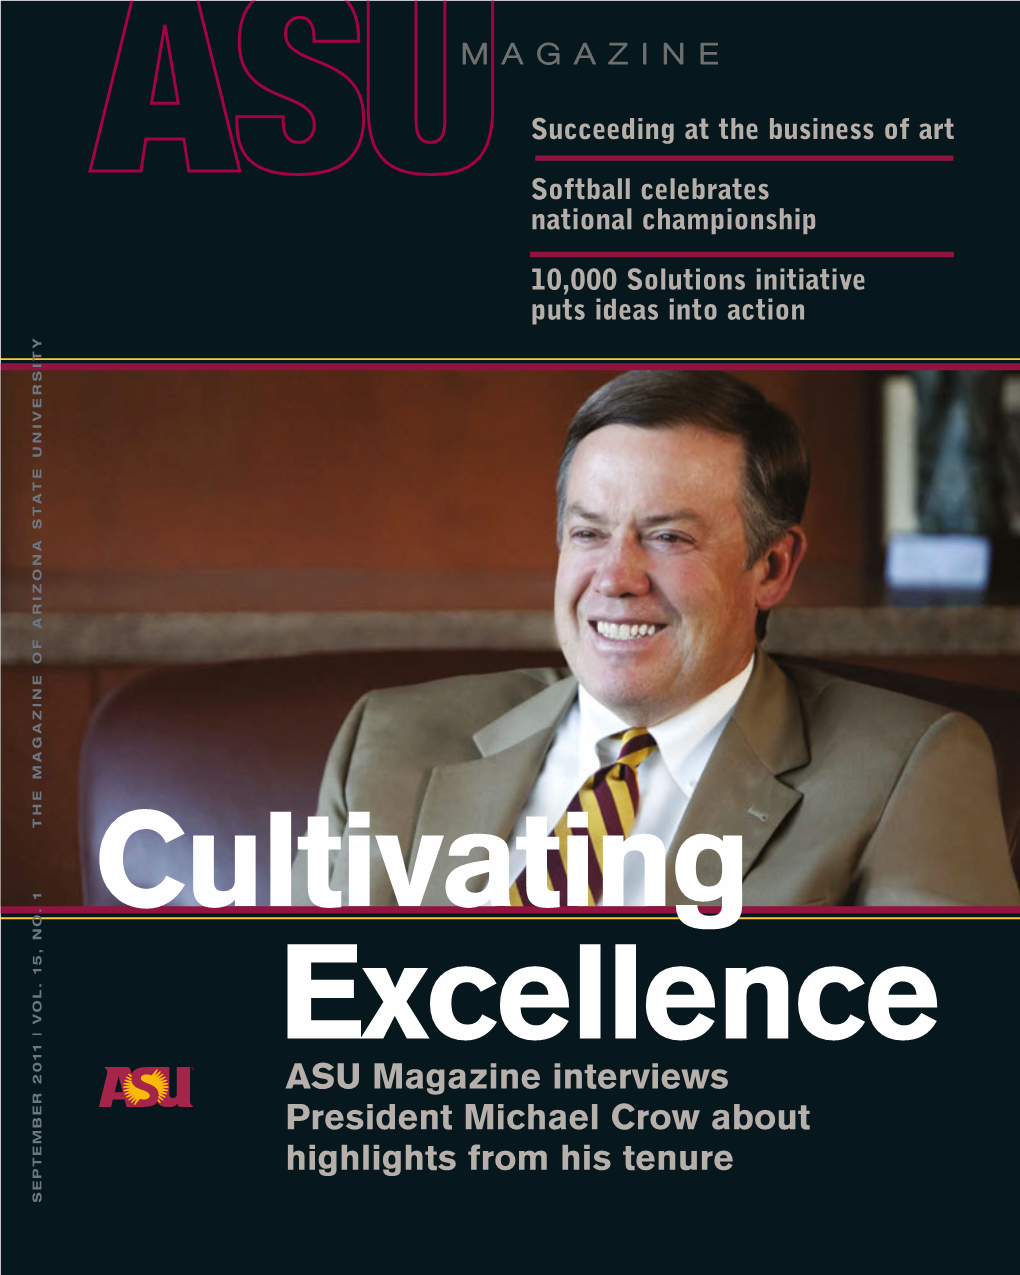 Views President Michael Crow About Highlights from His Tenure SEPTEMBER 2011 | VOL